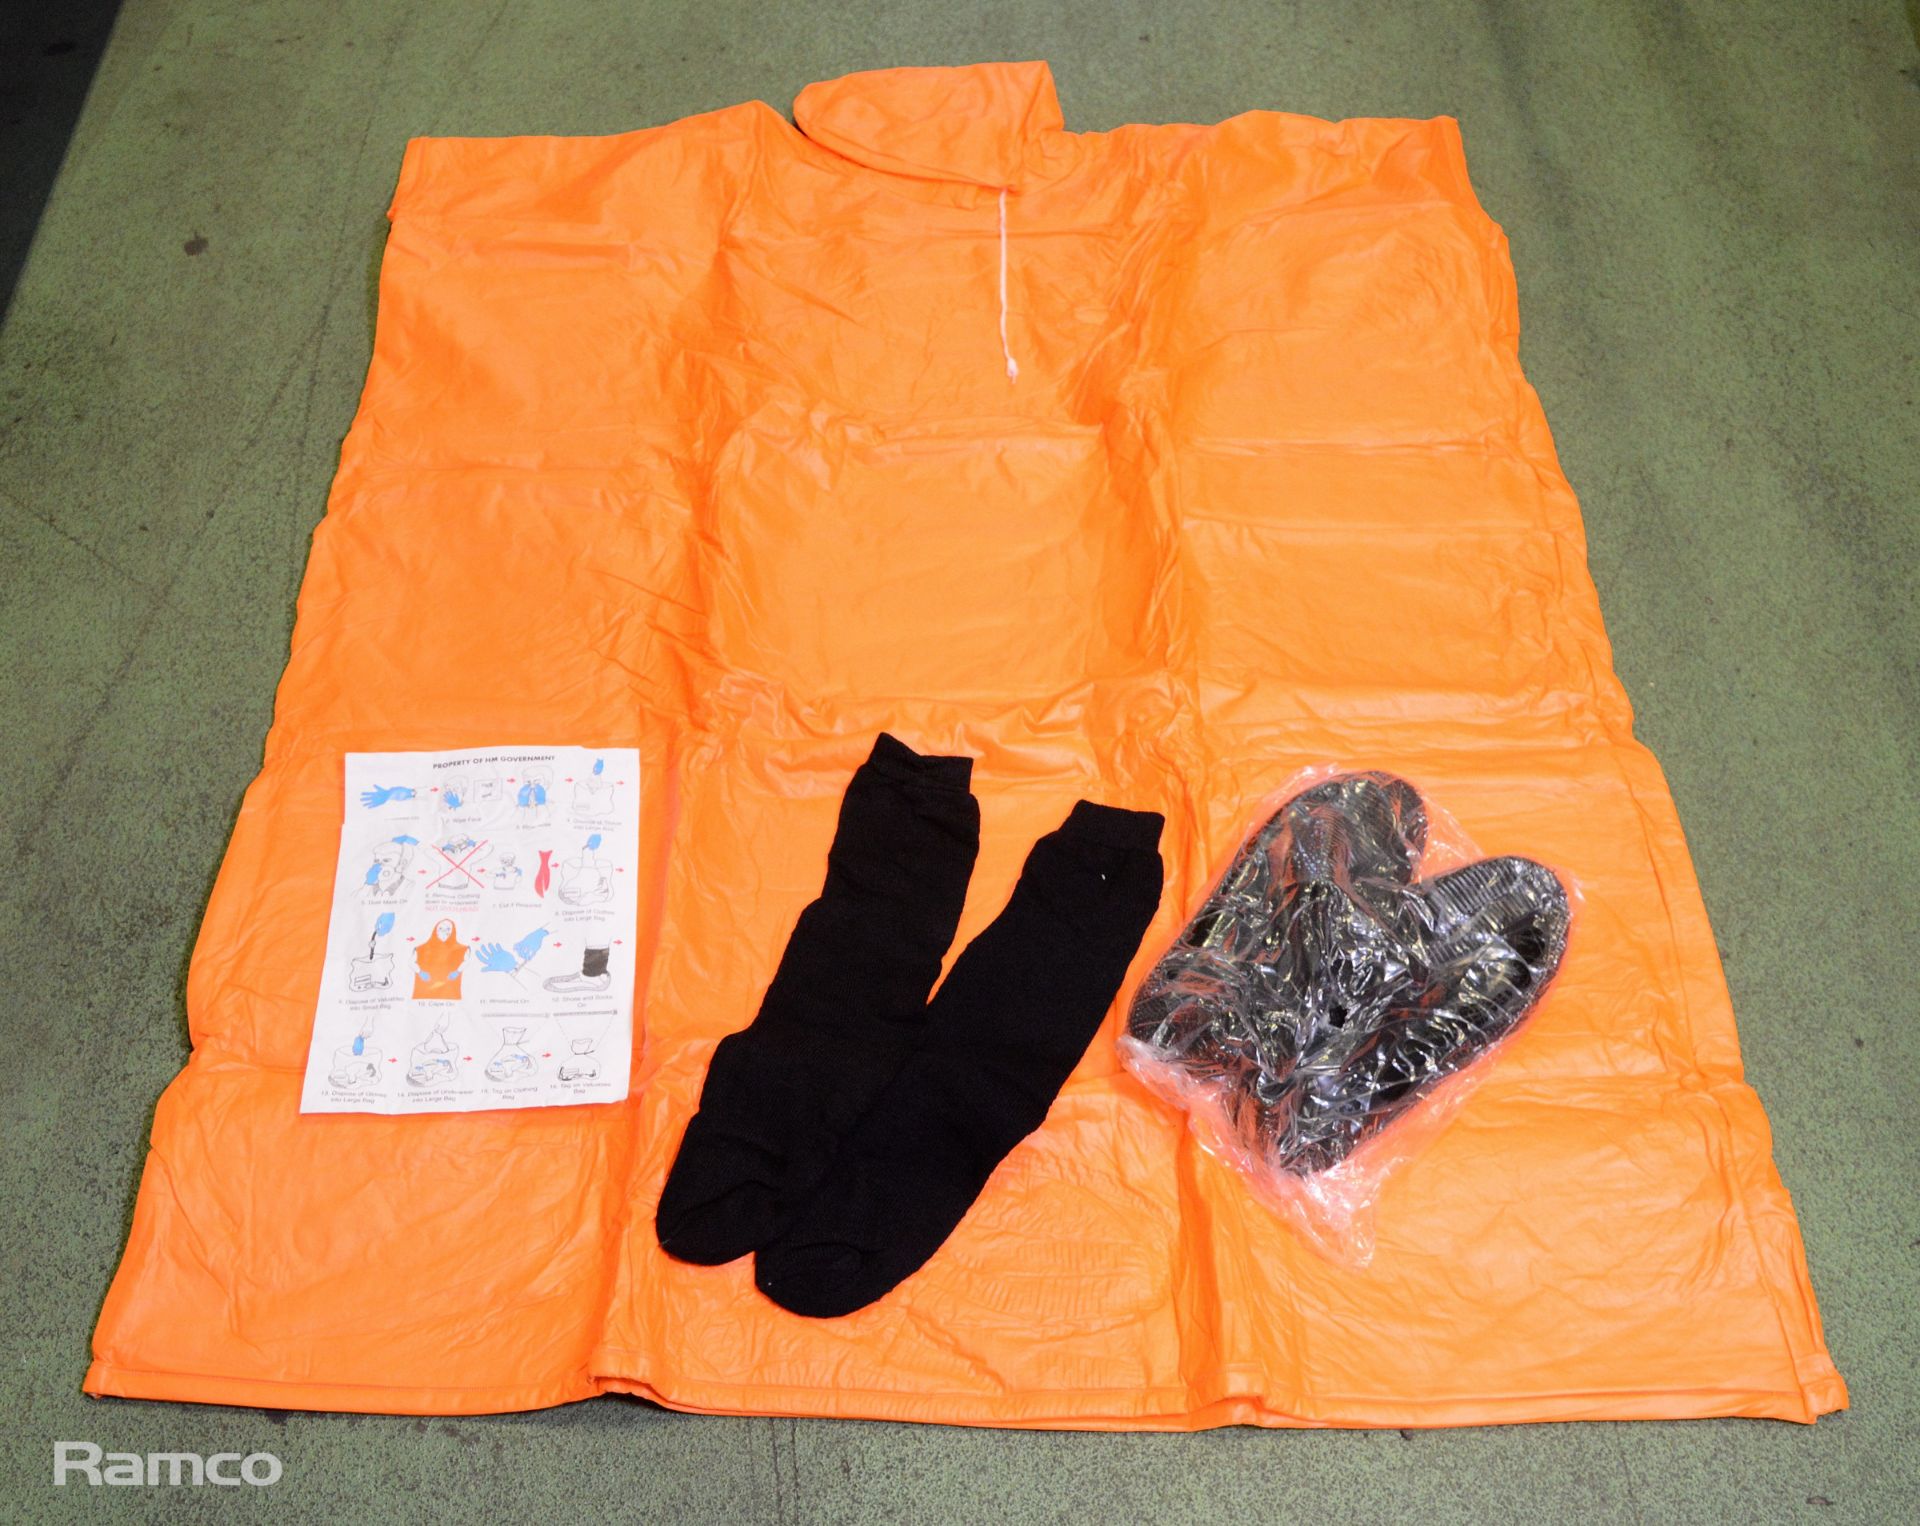 4x Contamination/disrobe kit. Size - Large adult. New and unused, but kit is incomplete - cape, shoe - Image 2 of 3